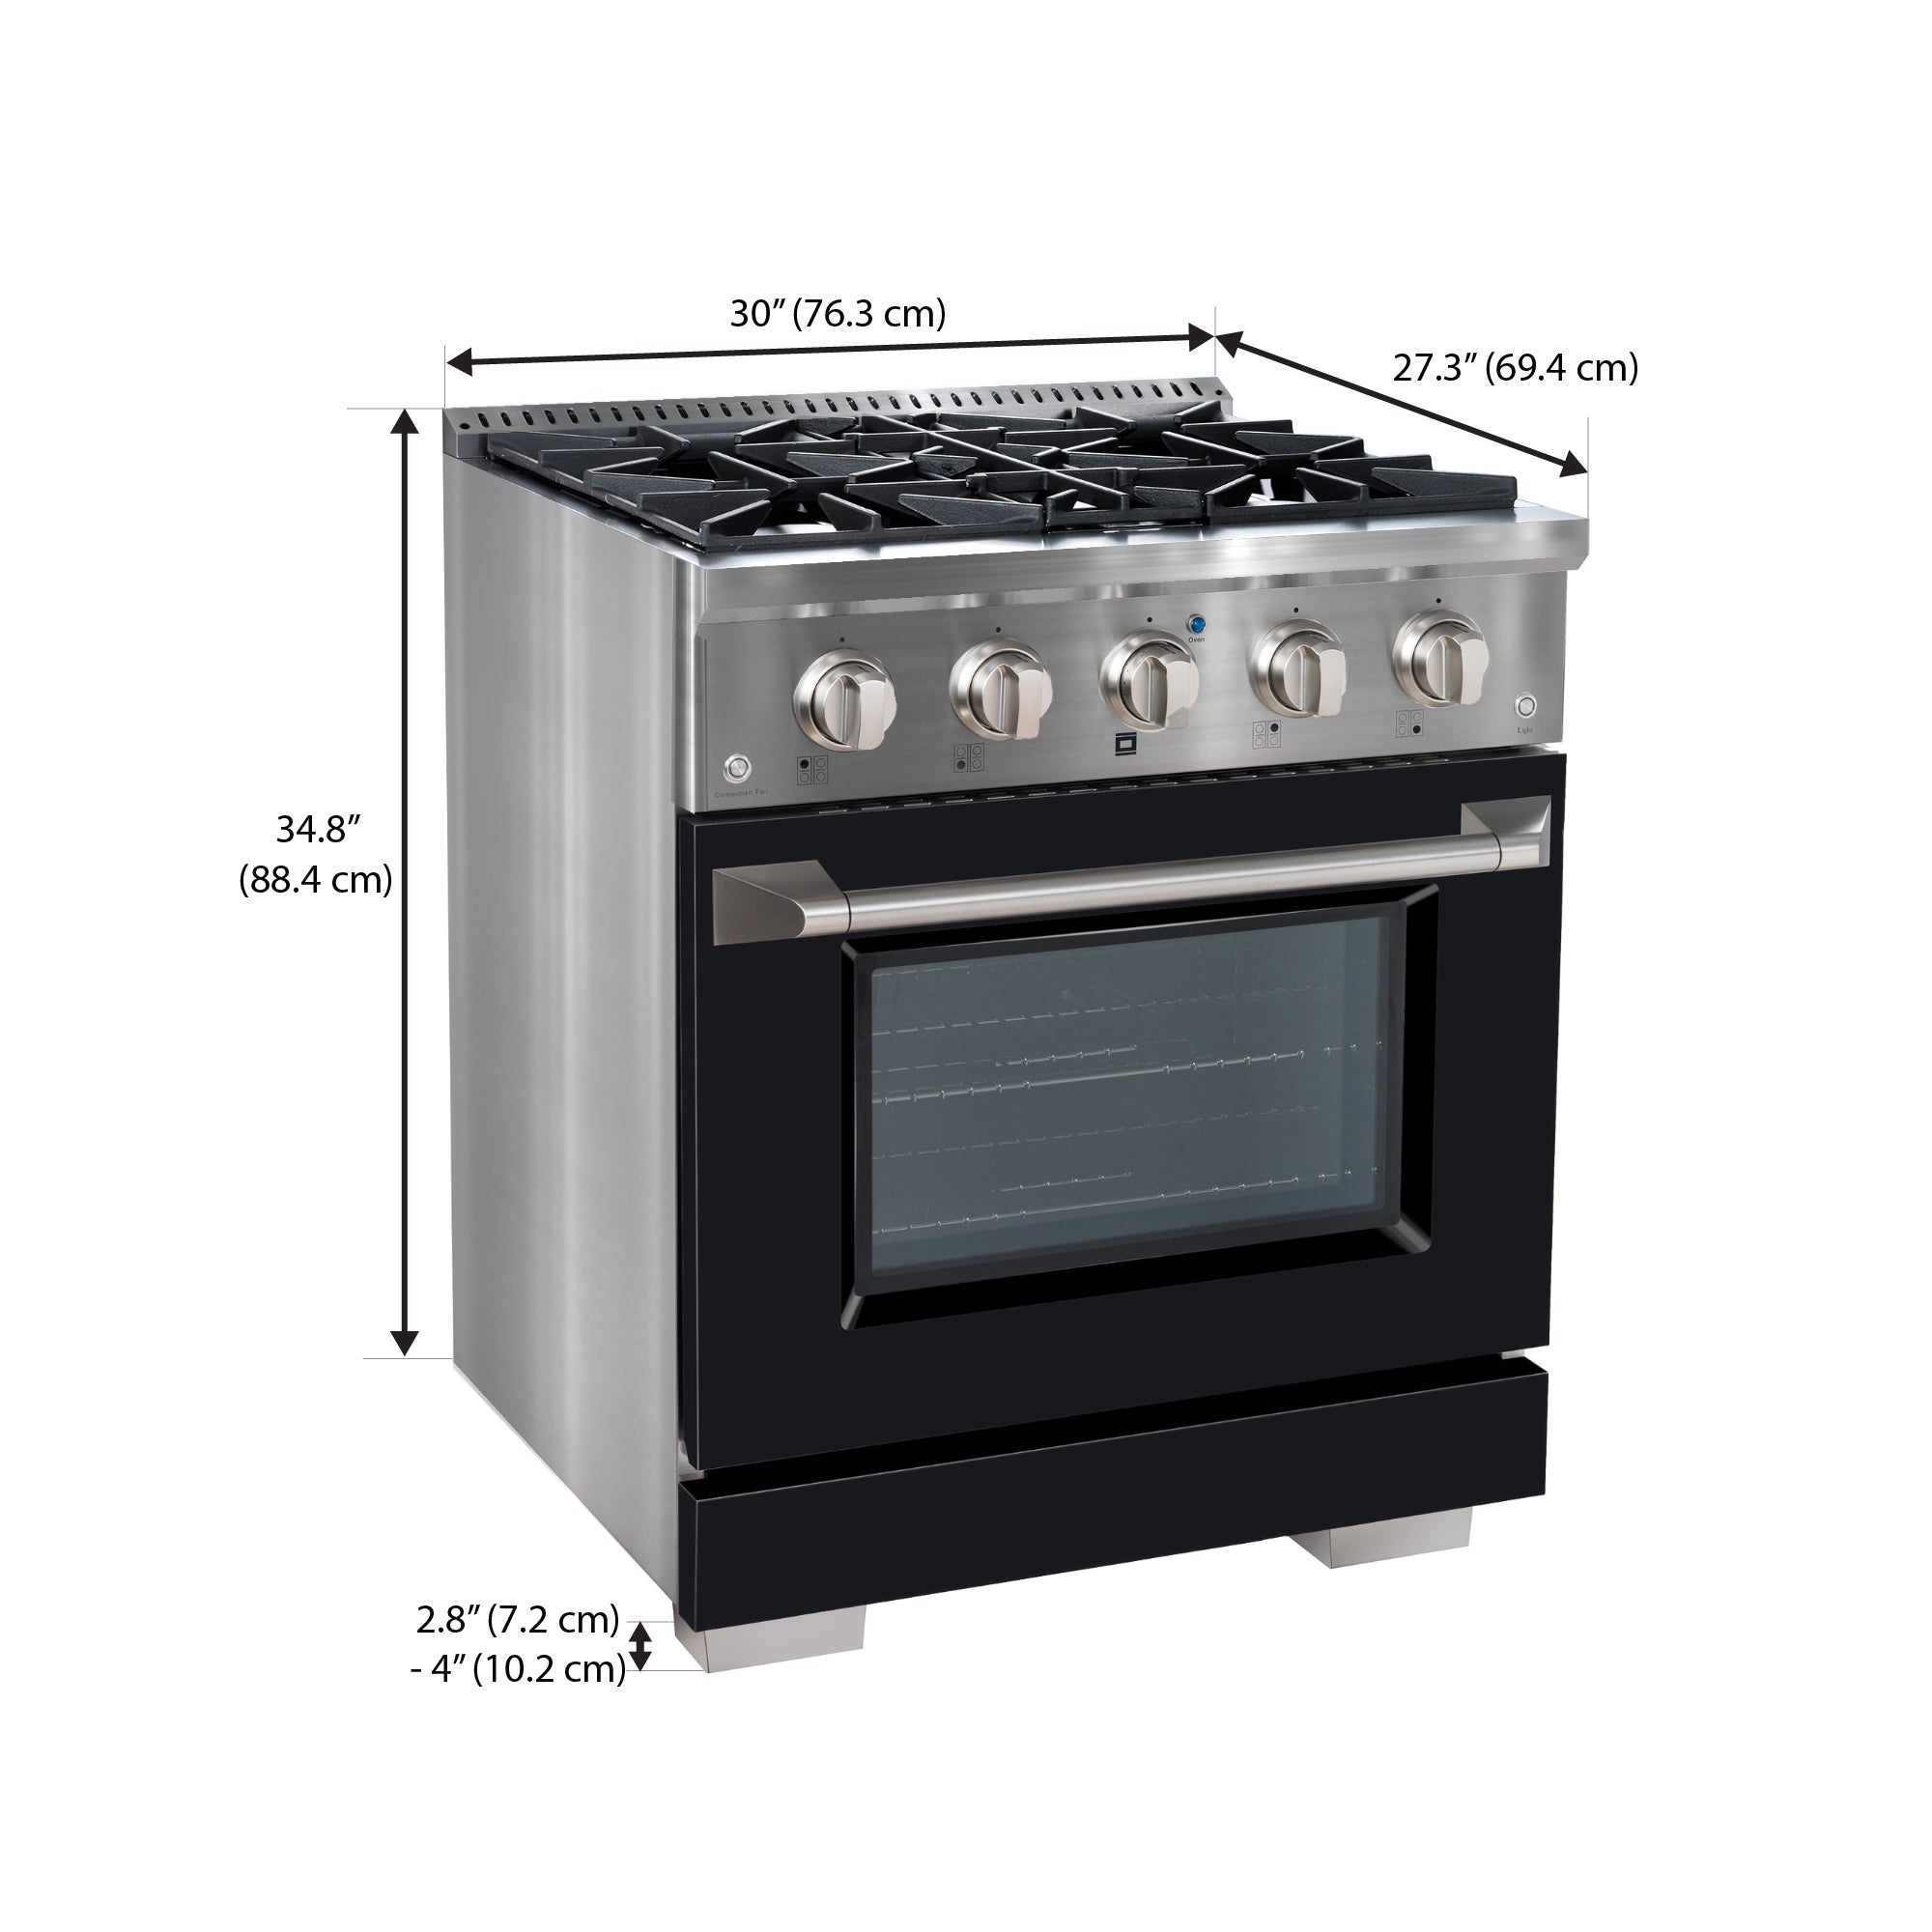 Ancona 30” 4.2 cu. ft. Dual Fuel Range with 4 Burners and Convection Oven in Stainless Steel with Black Door